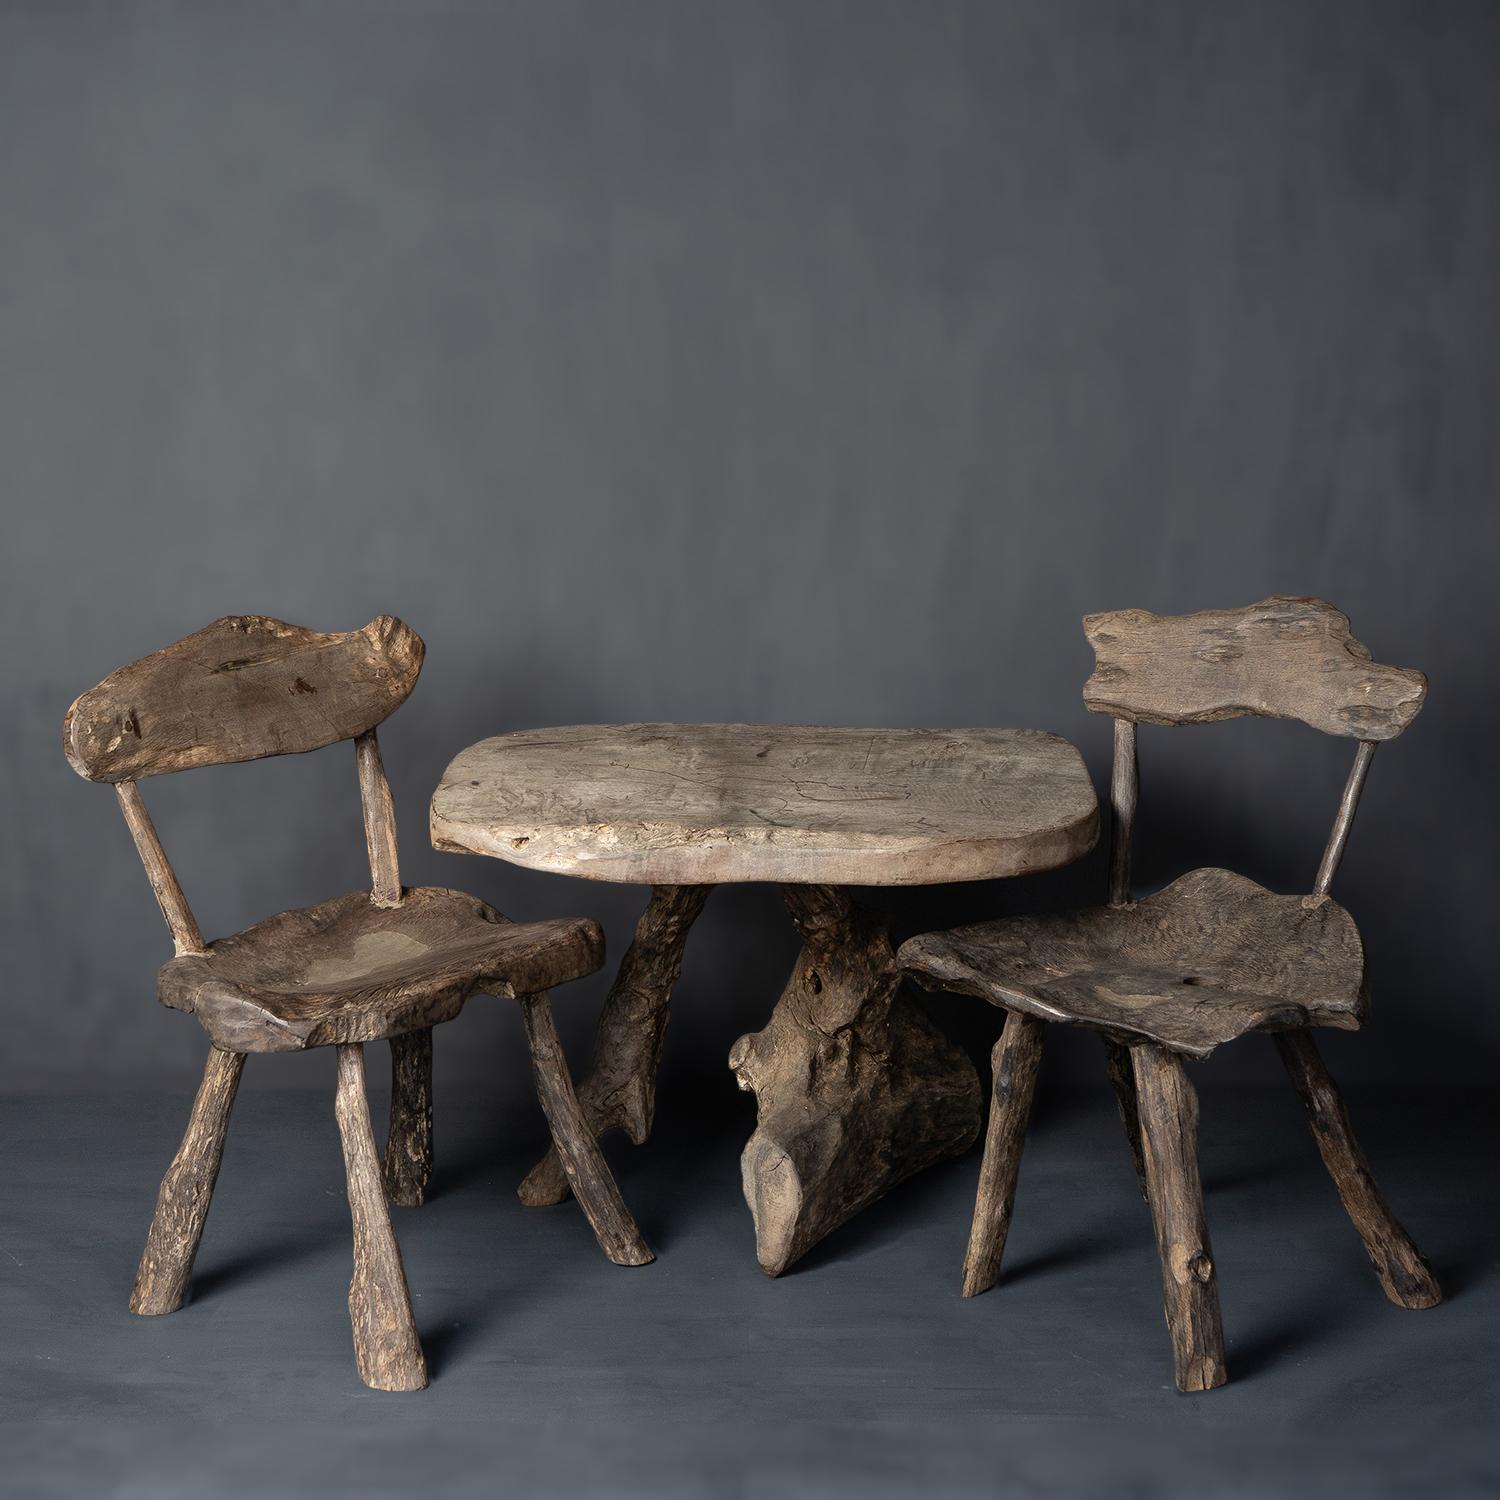 VINTAGE RUSTIC TREE TRUNK CHAIRS AND TABLE
Made from joined pieces of Bornean Ironwood (Eusideroxylon Zwageri) in their most naturalistic forms to create an almost grotto-style table and two-chair set.

Can be used inside or out.

They are in very